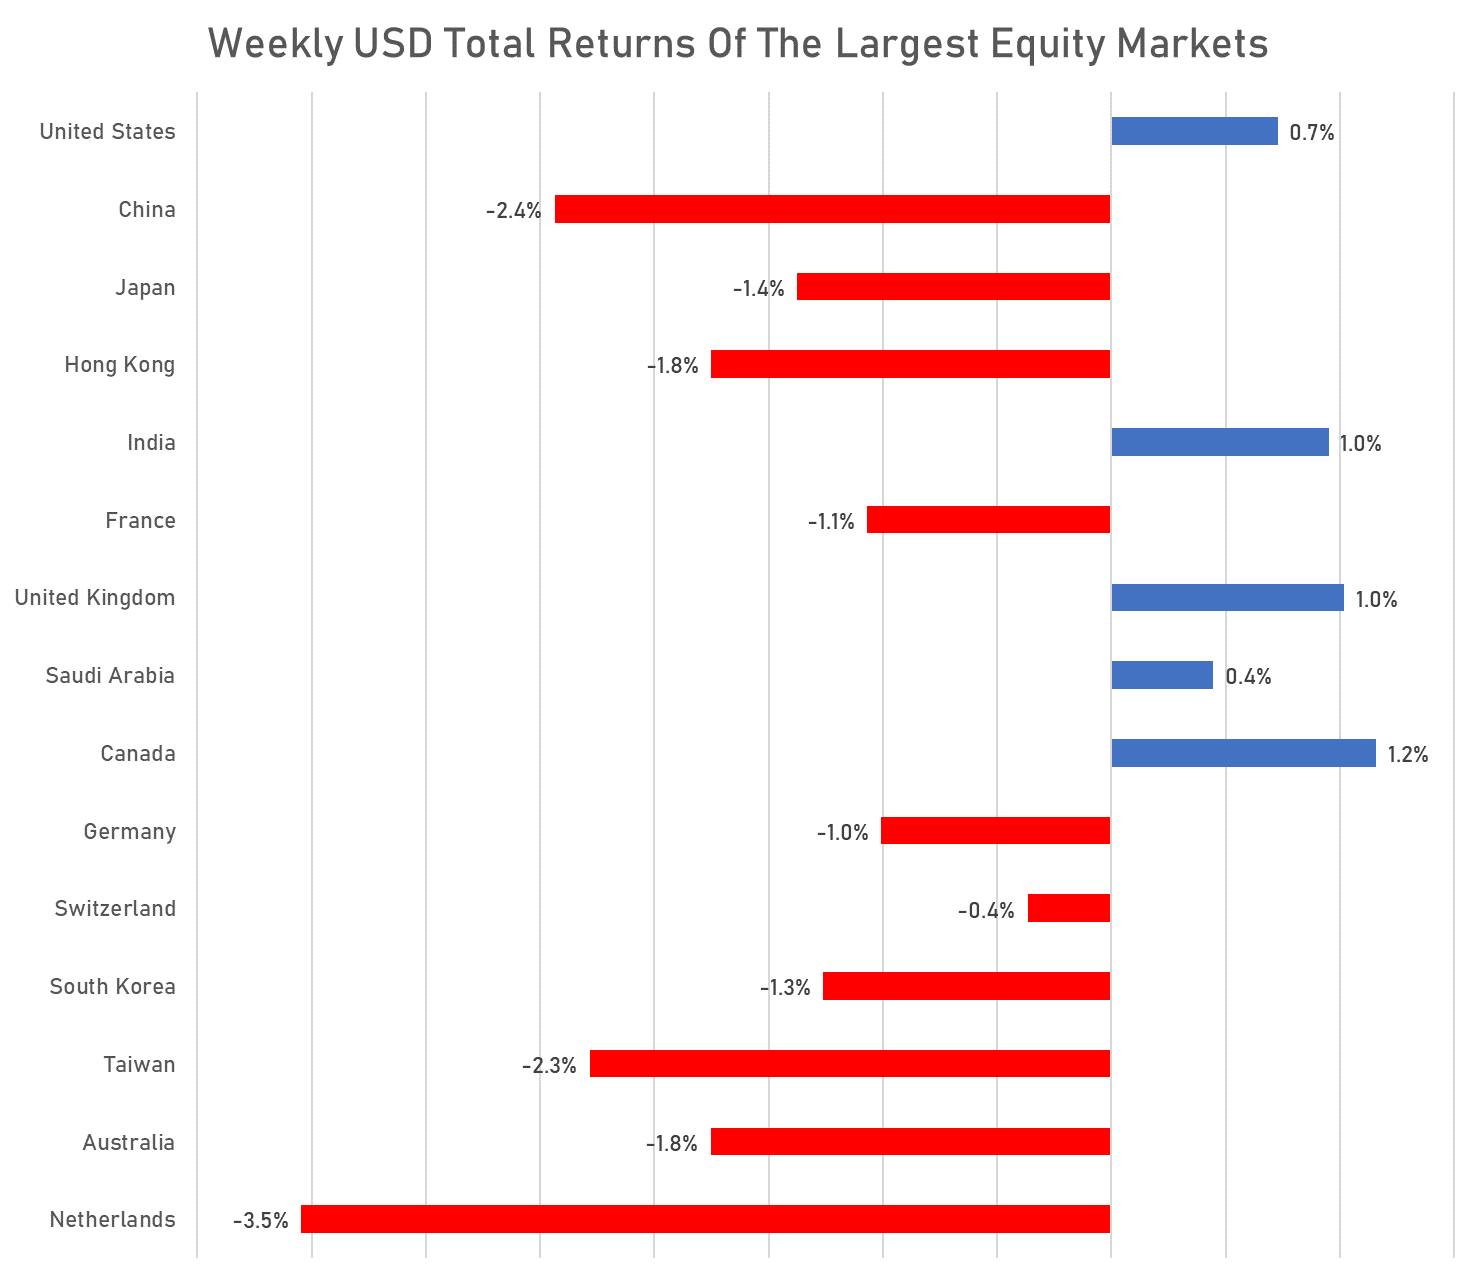 Weekly USD Total Returns of large equity markets | Sources: phipost.com, FactSet data